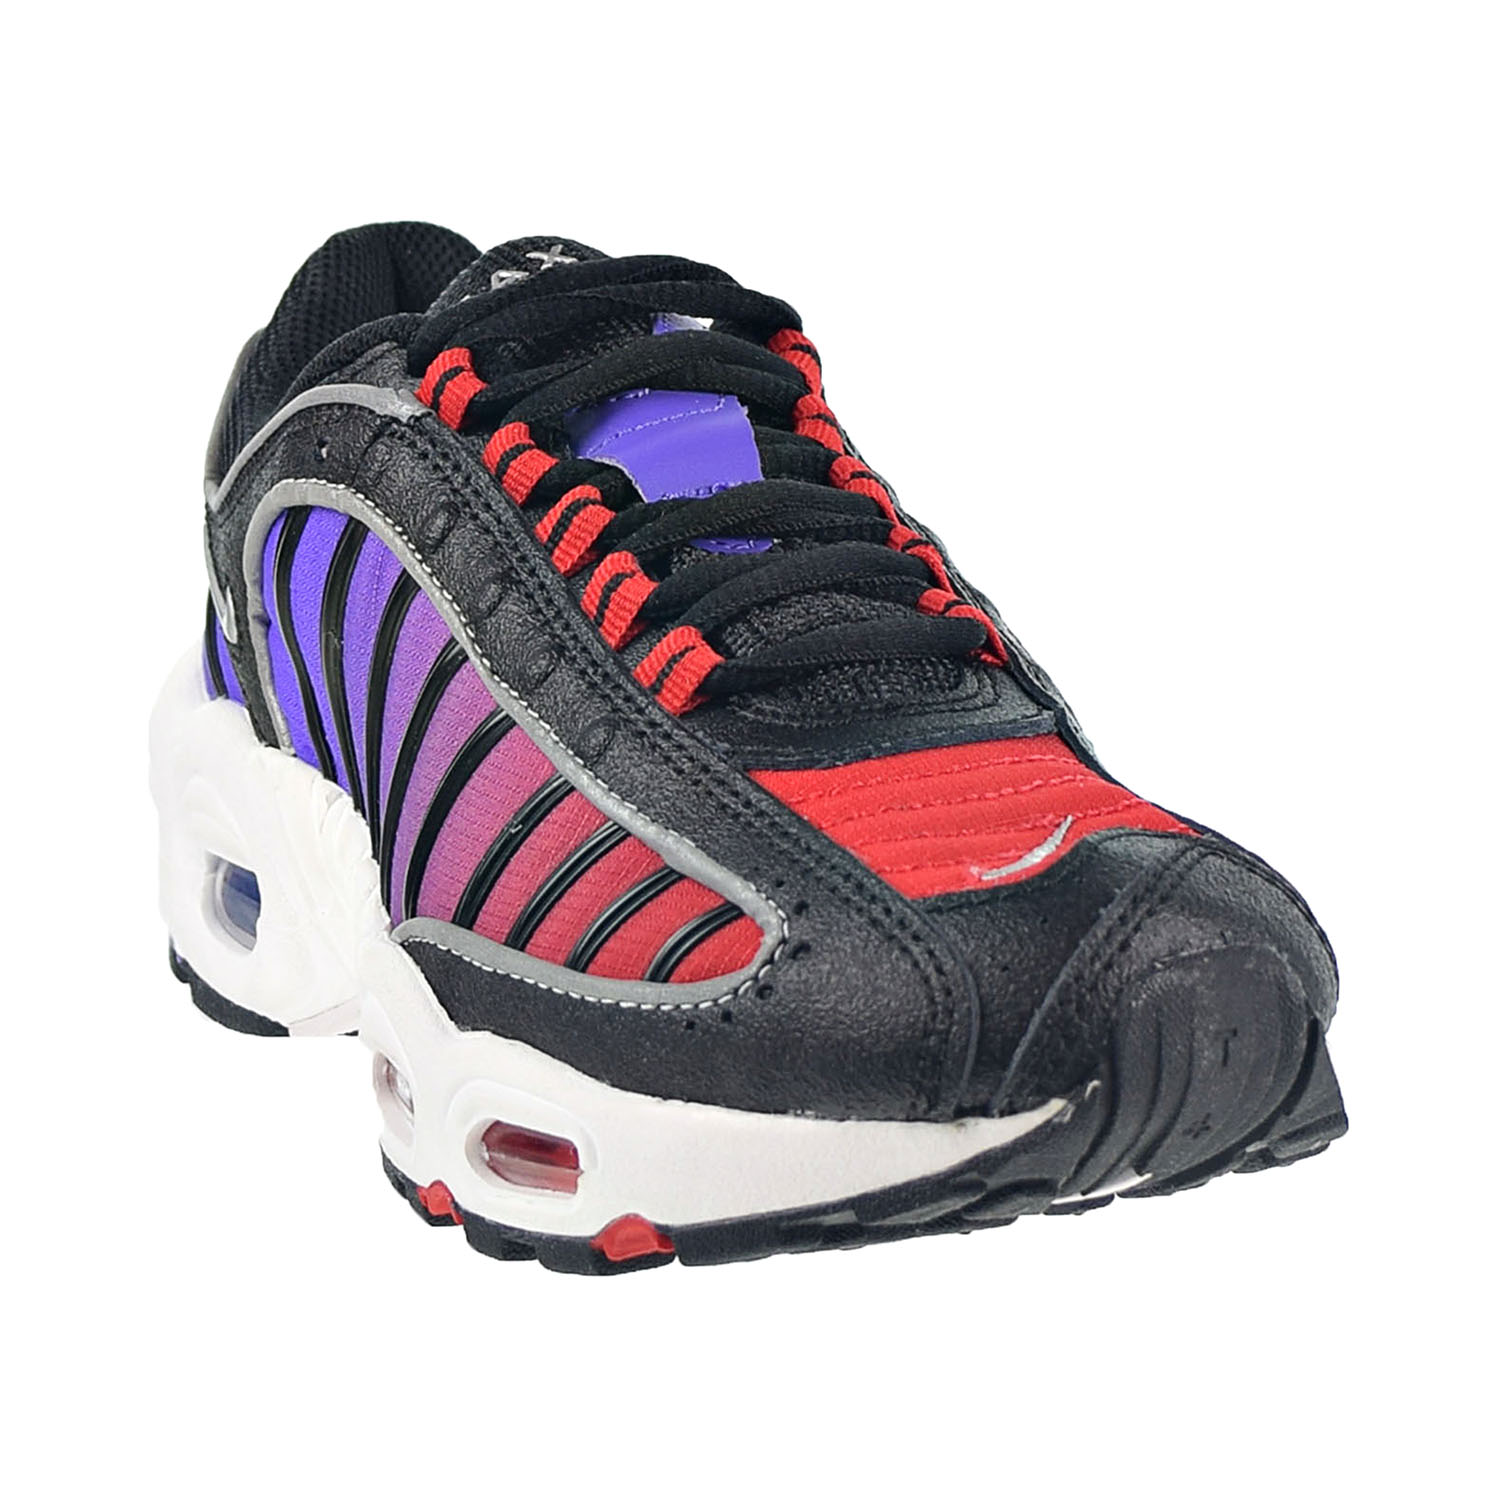 Nike Women's Air Max Tailwind IV Shoes Black-White-University Red-Psychic Purple cq9962-001 - image 2 of 6